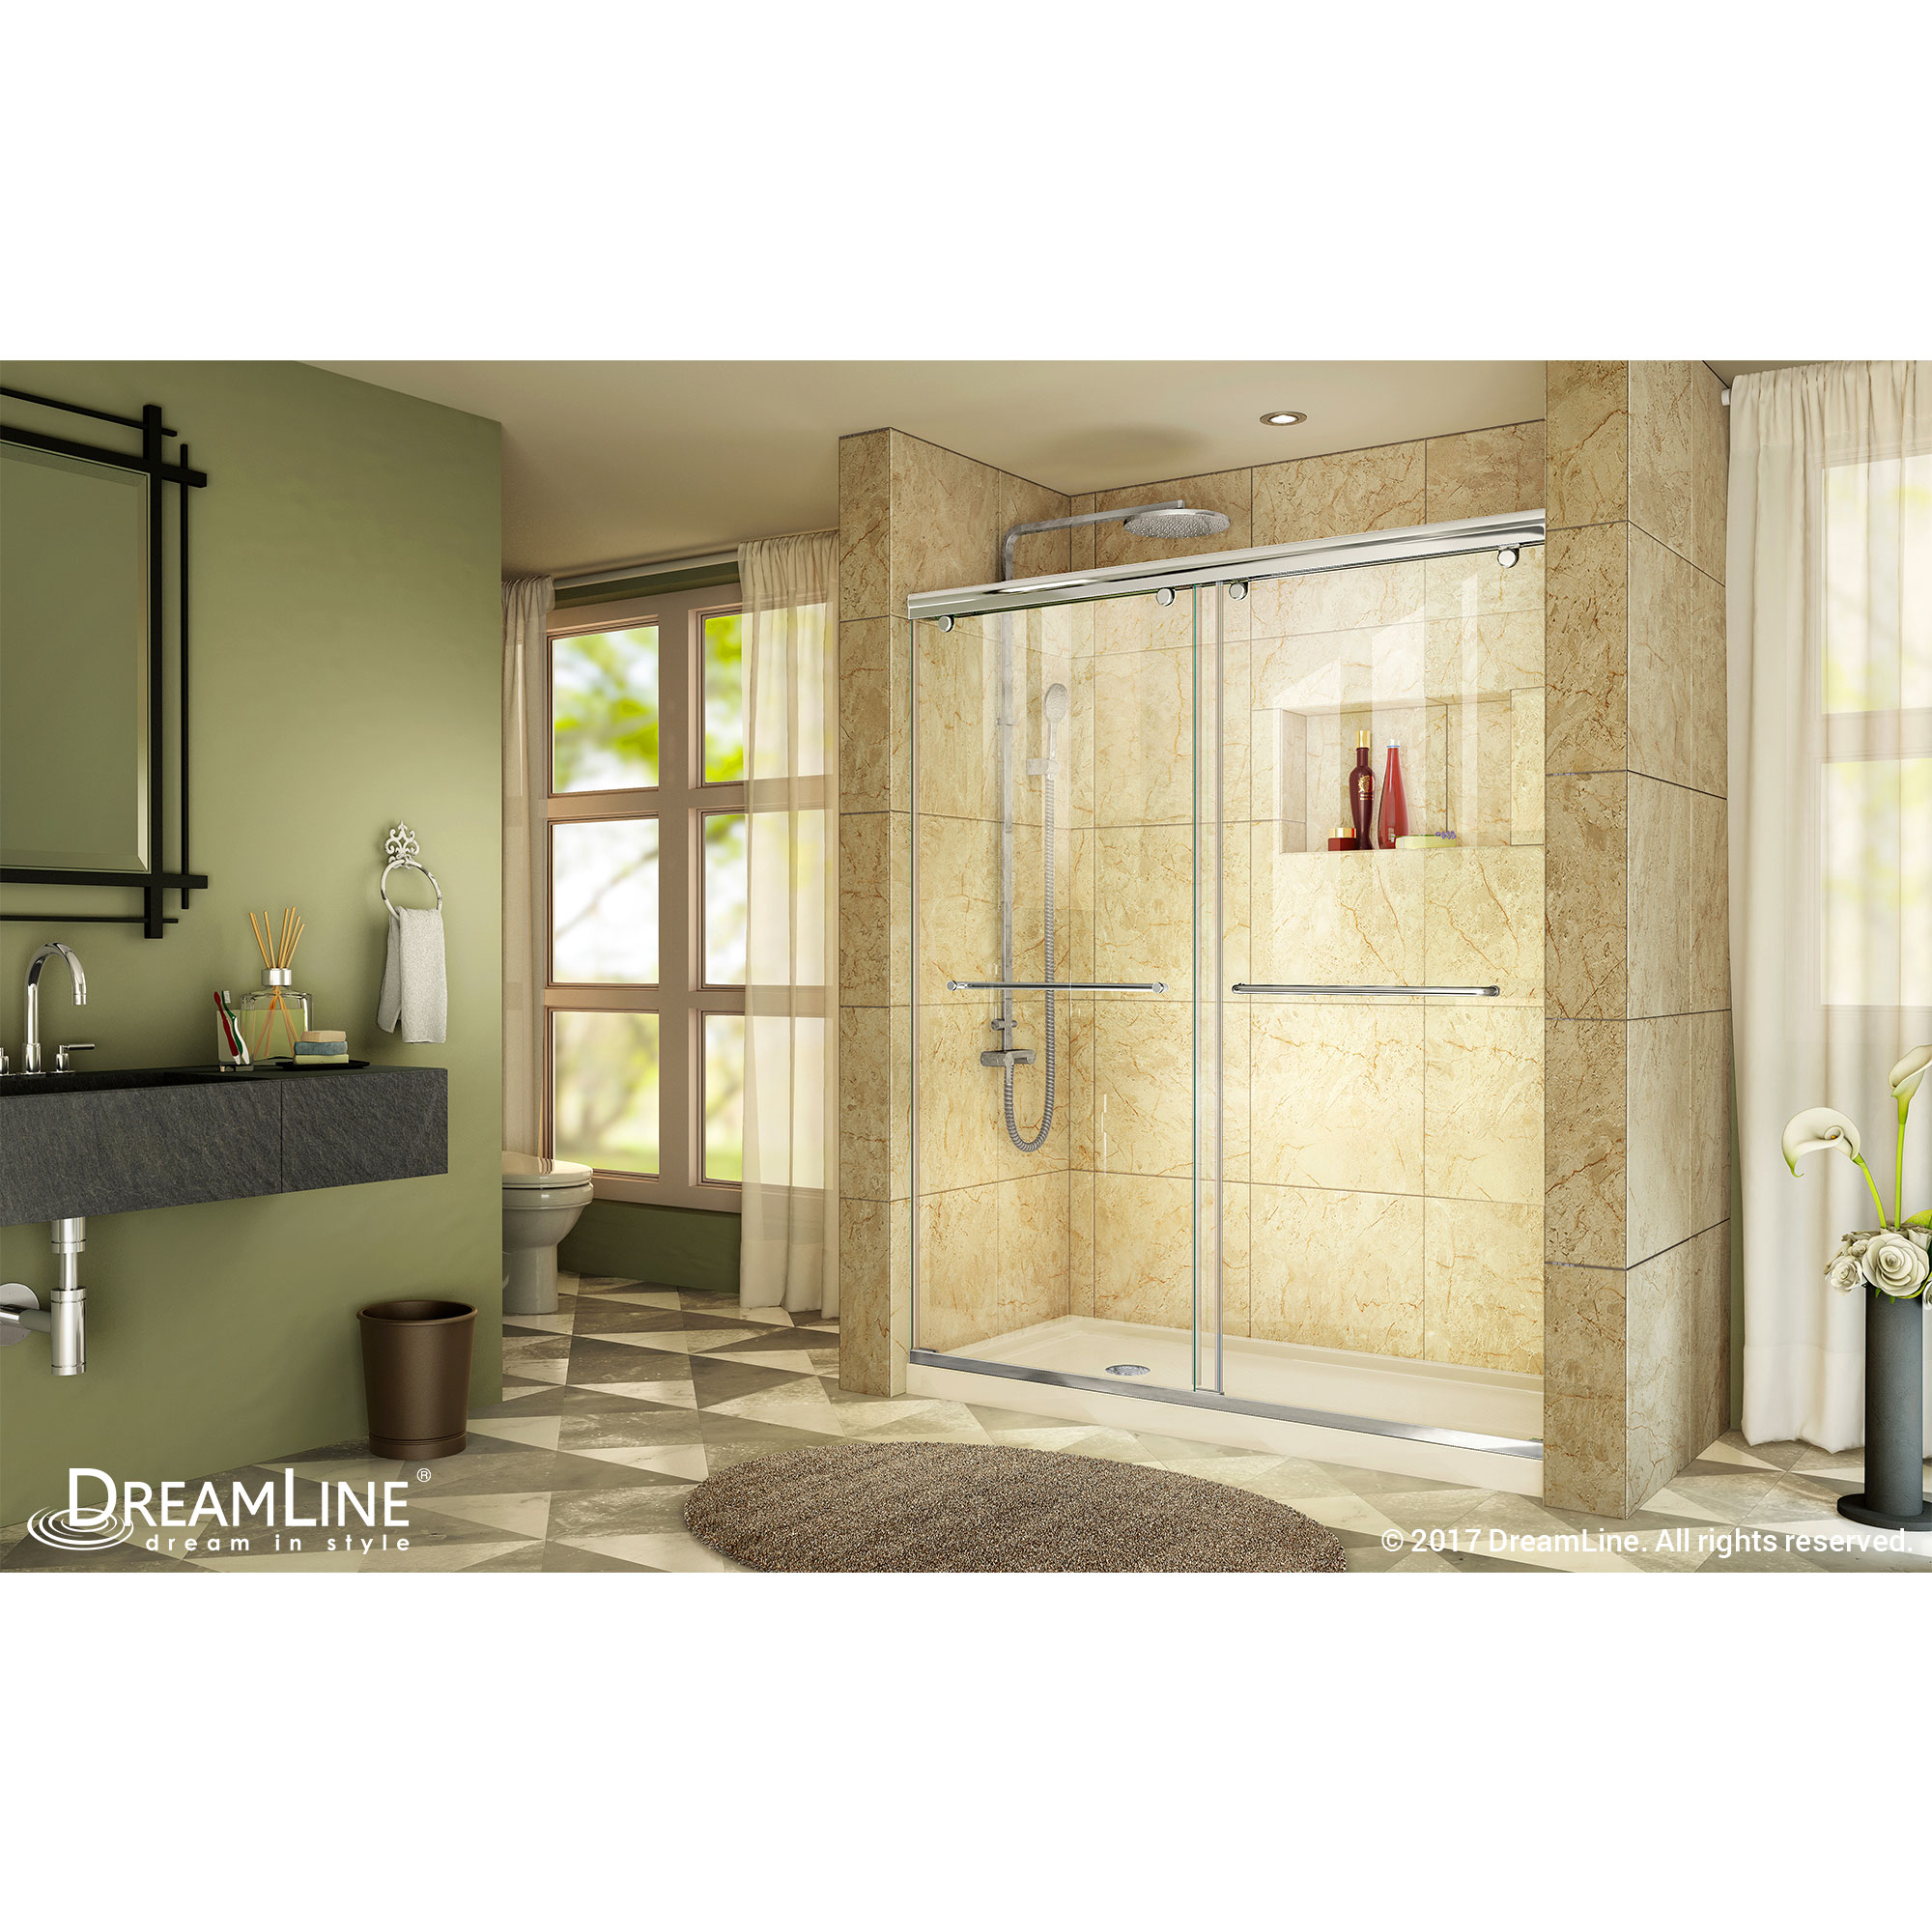 DreamLine Charisma 36 in. D x 60 in. W x 78 3/4 in. H Bypass Shower Door in Chrome with Left Drain Biscuit Base Kit